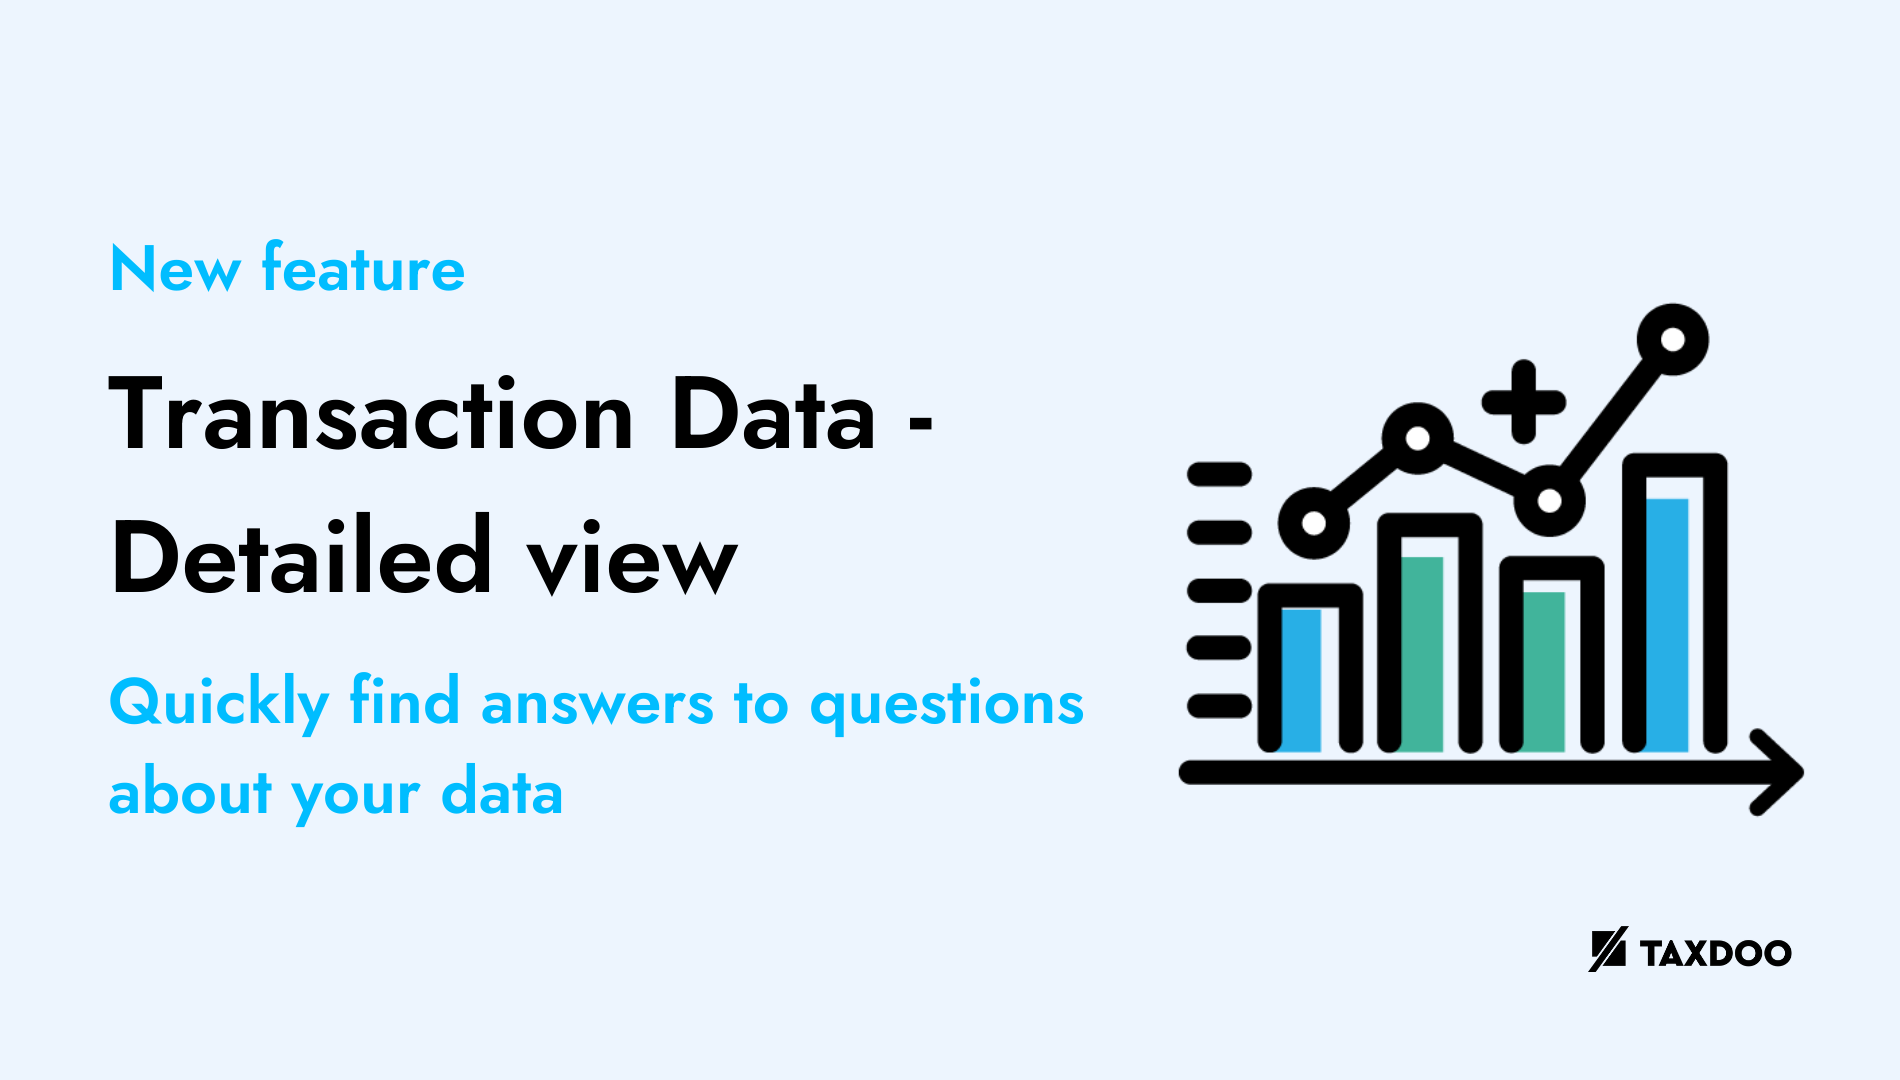 For tax professionals and online sellers: Quickly find answers to questions about your data | Transaction Data – detailed view